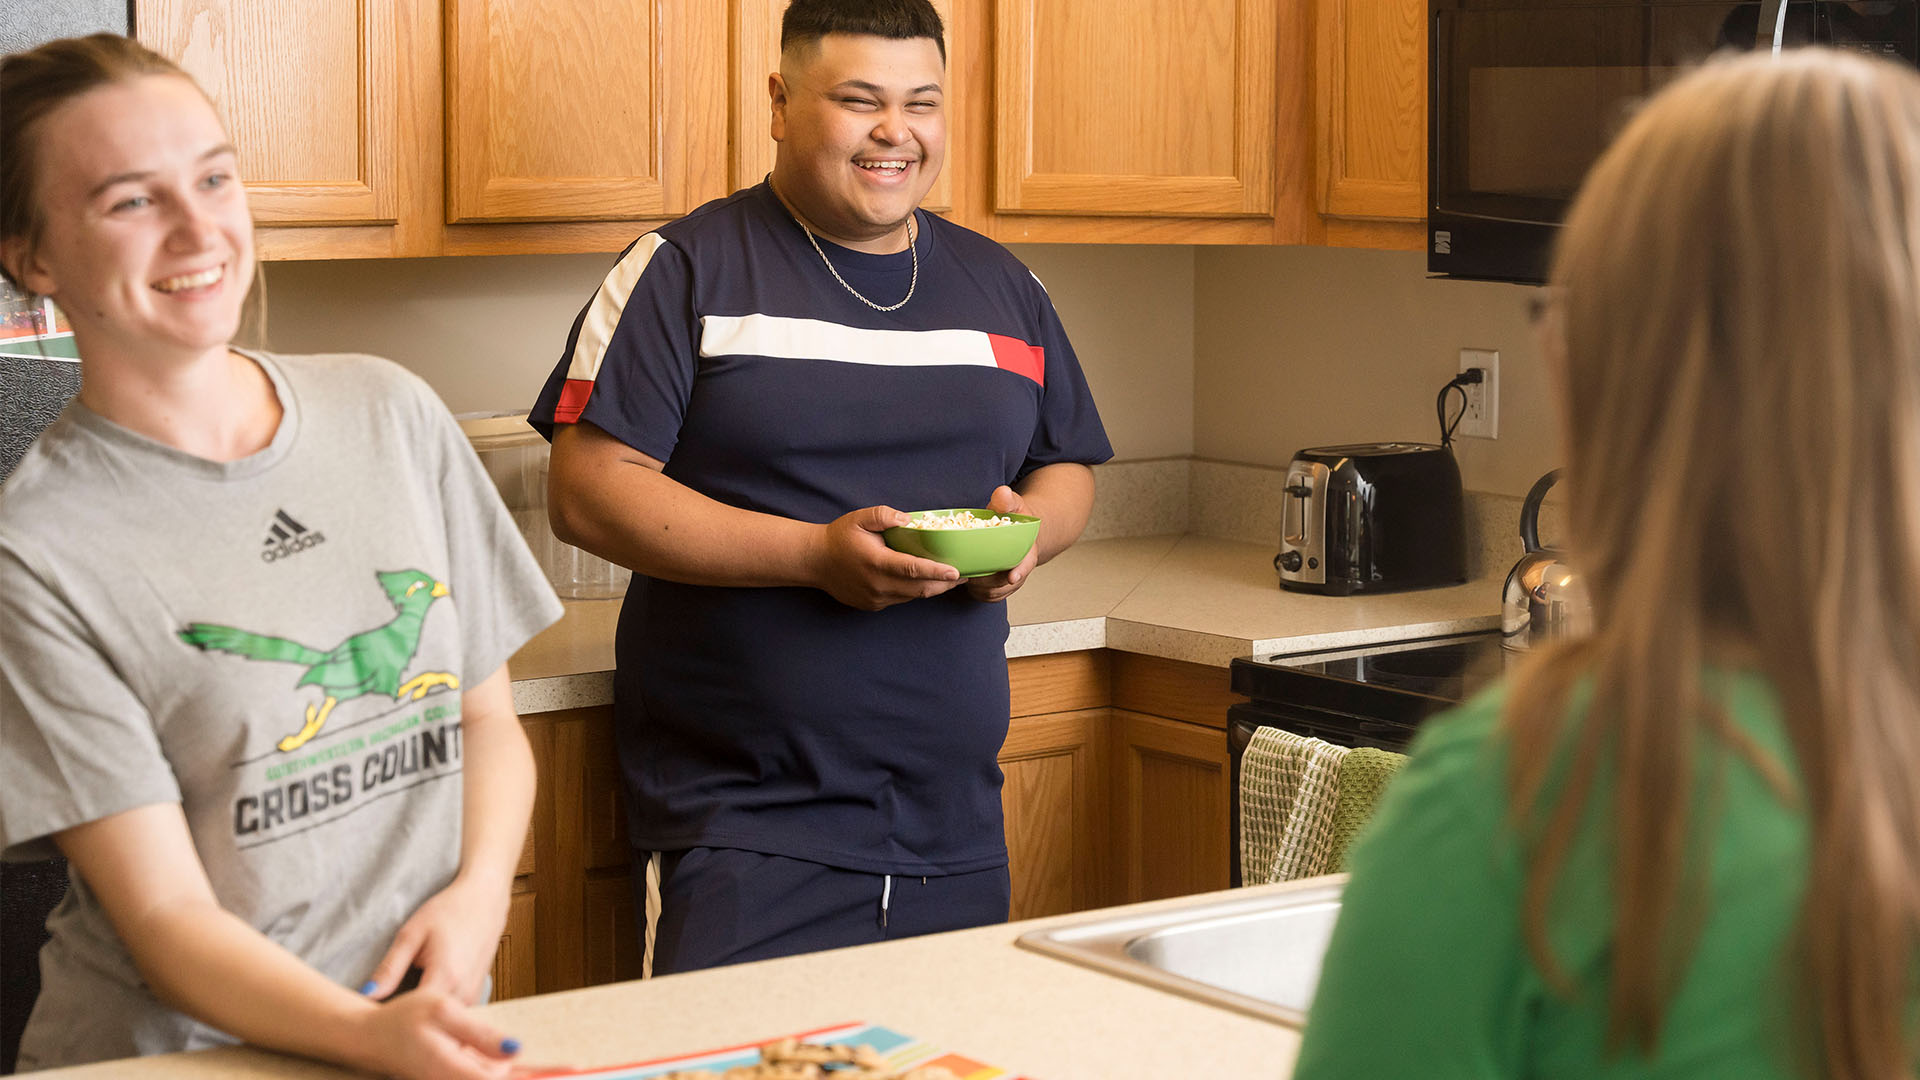 Each residence hall room at SMC offers a full kitchen.